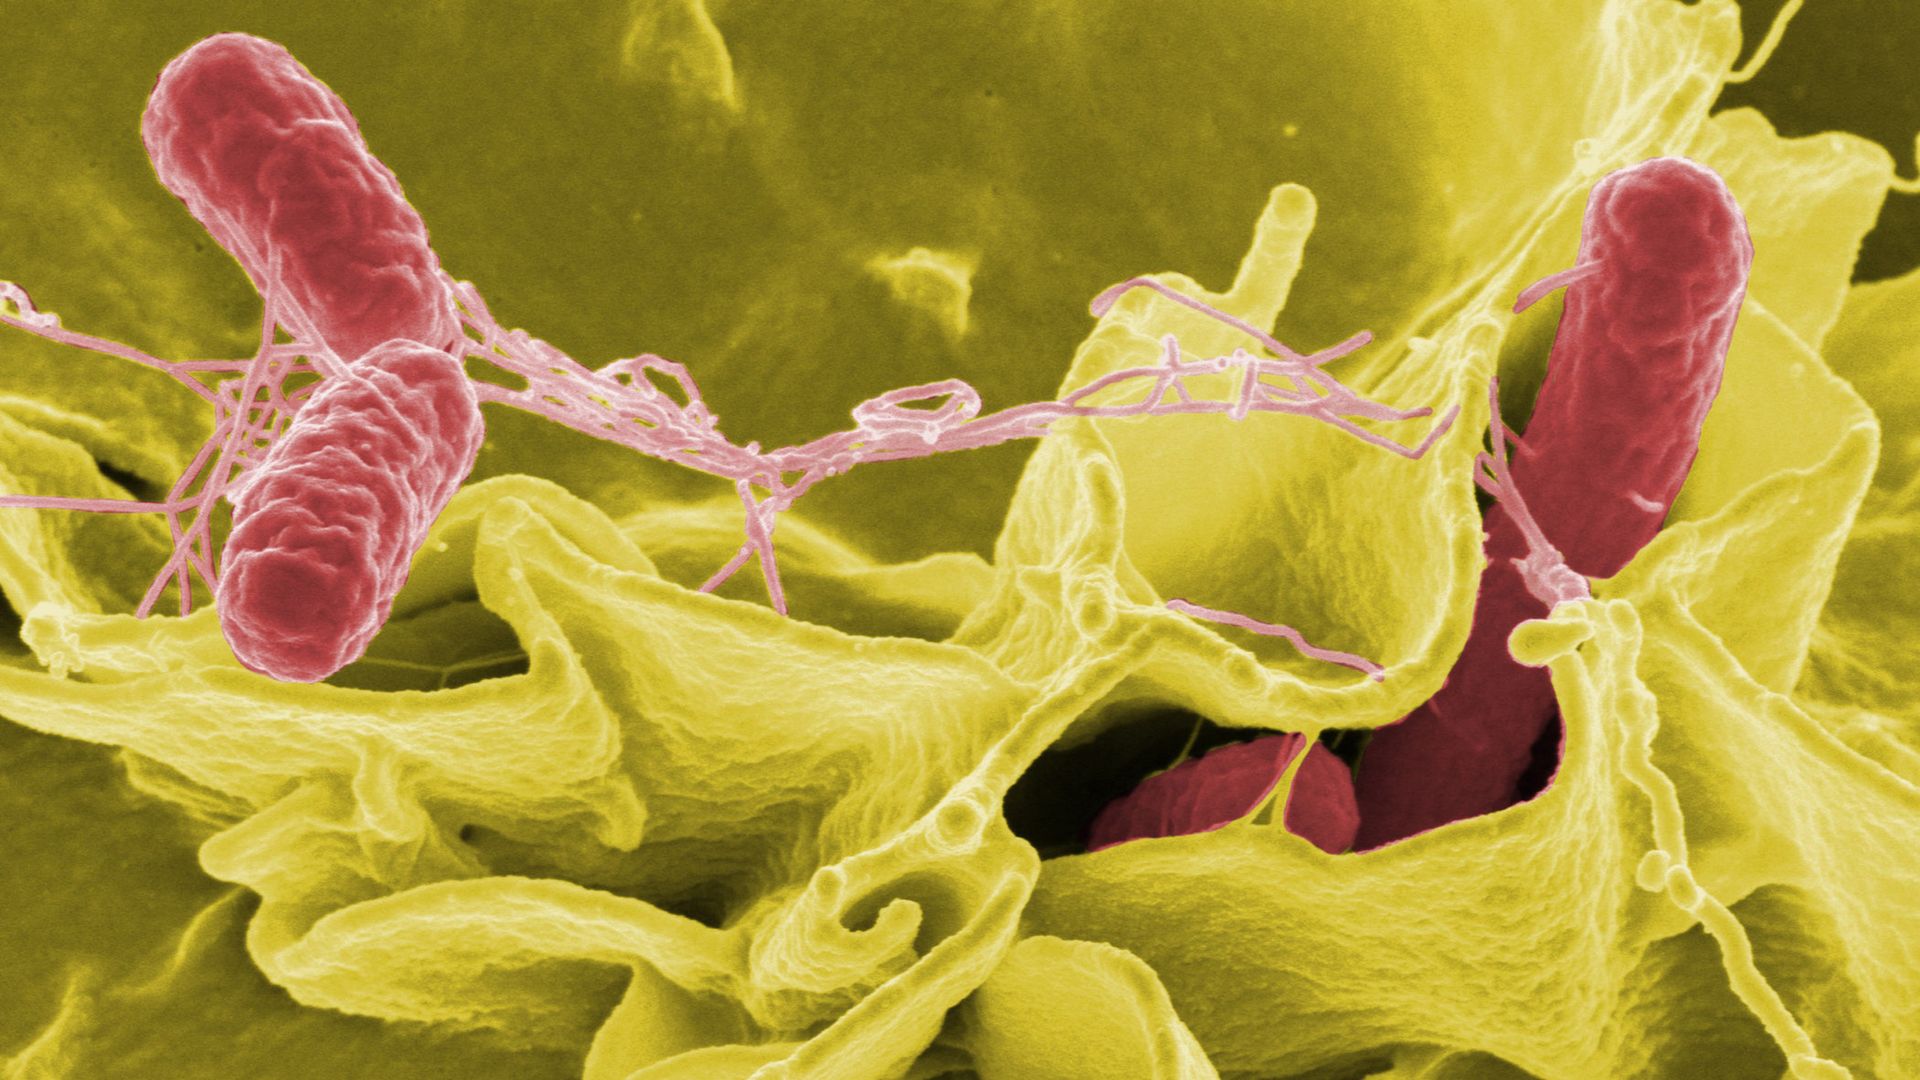 Photo of a different strain of Salmonella as it invades cultured human cells